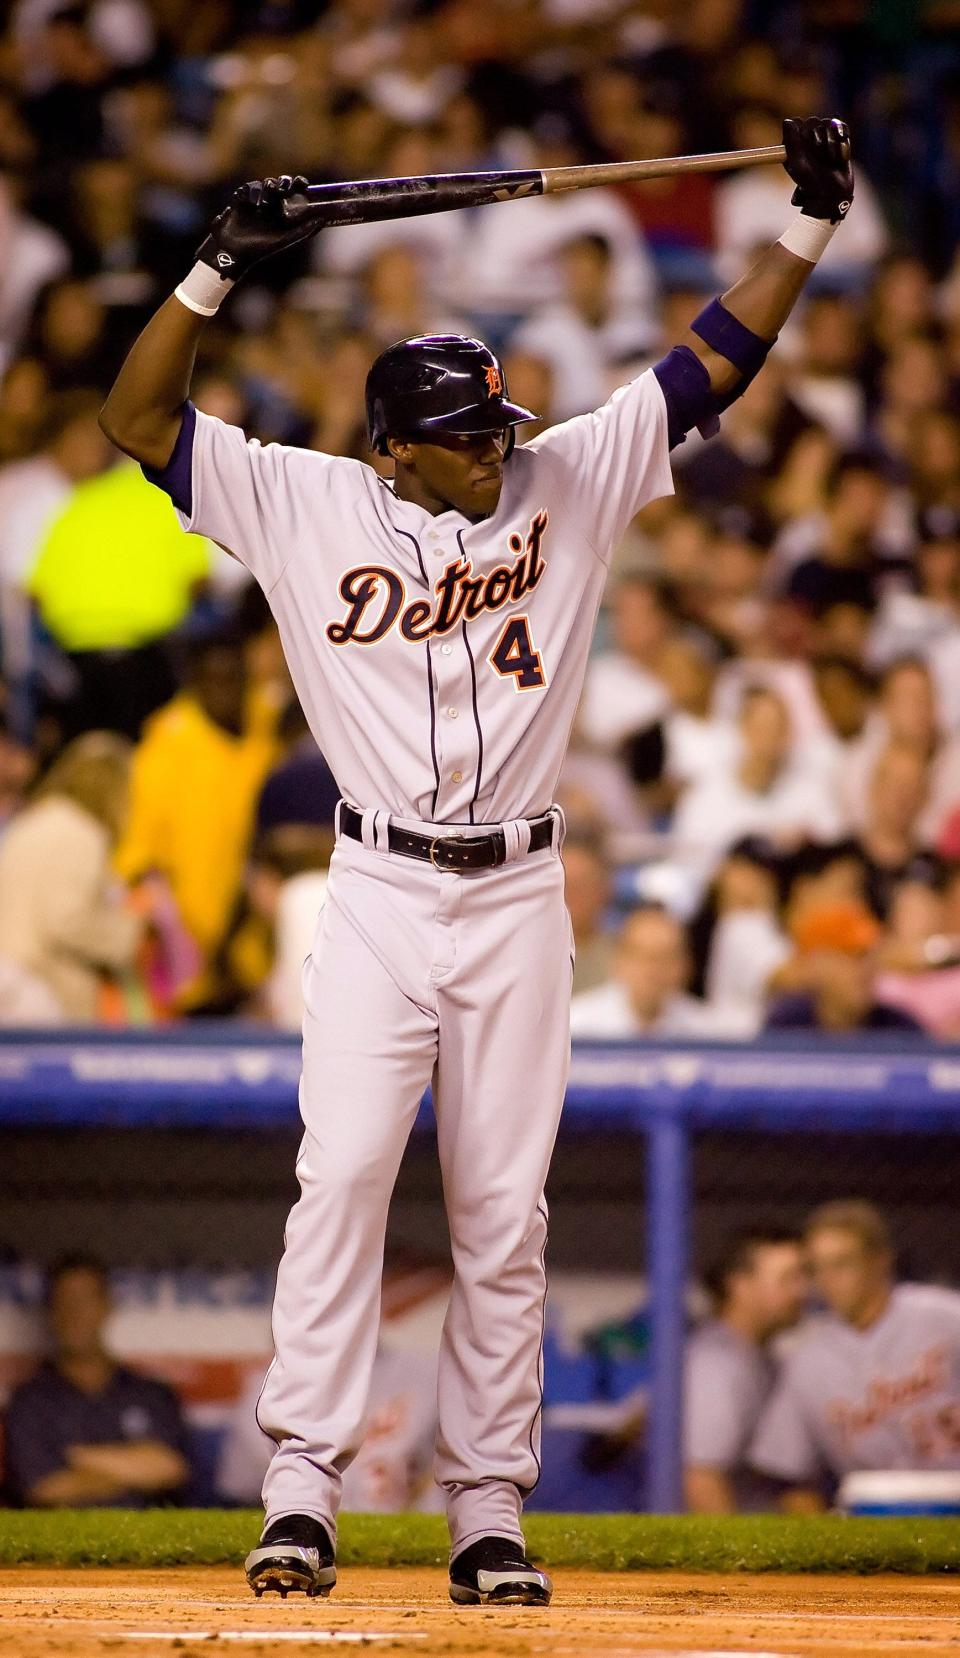 Tigers outfielder Cameron Maybin, then a rookie, stretches before his first Major League at-bat in the first inning Aug. 17, 2007 against the New York Yankees at Yankee Stadium in the Bronx. Maybin faced Andy Pettitte in his first MLB plate appearance.